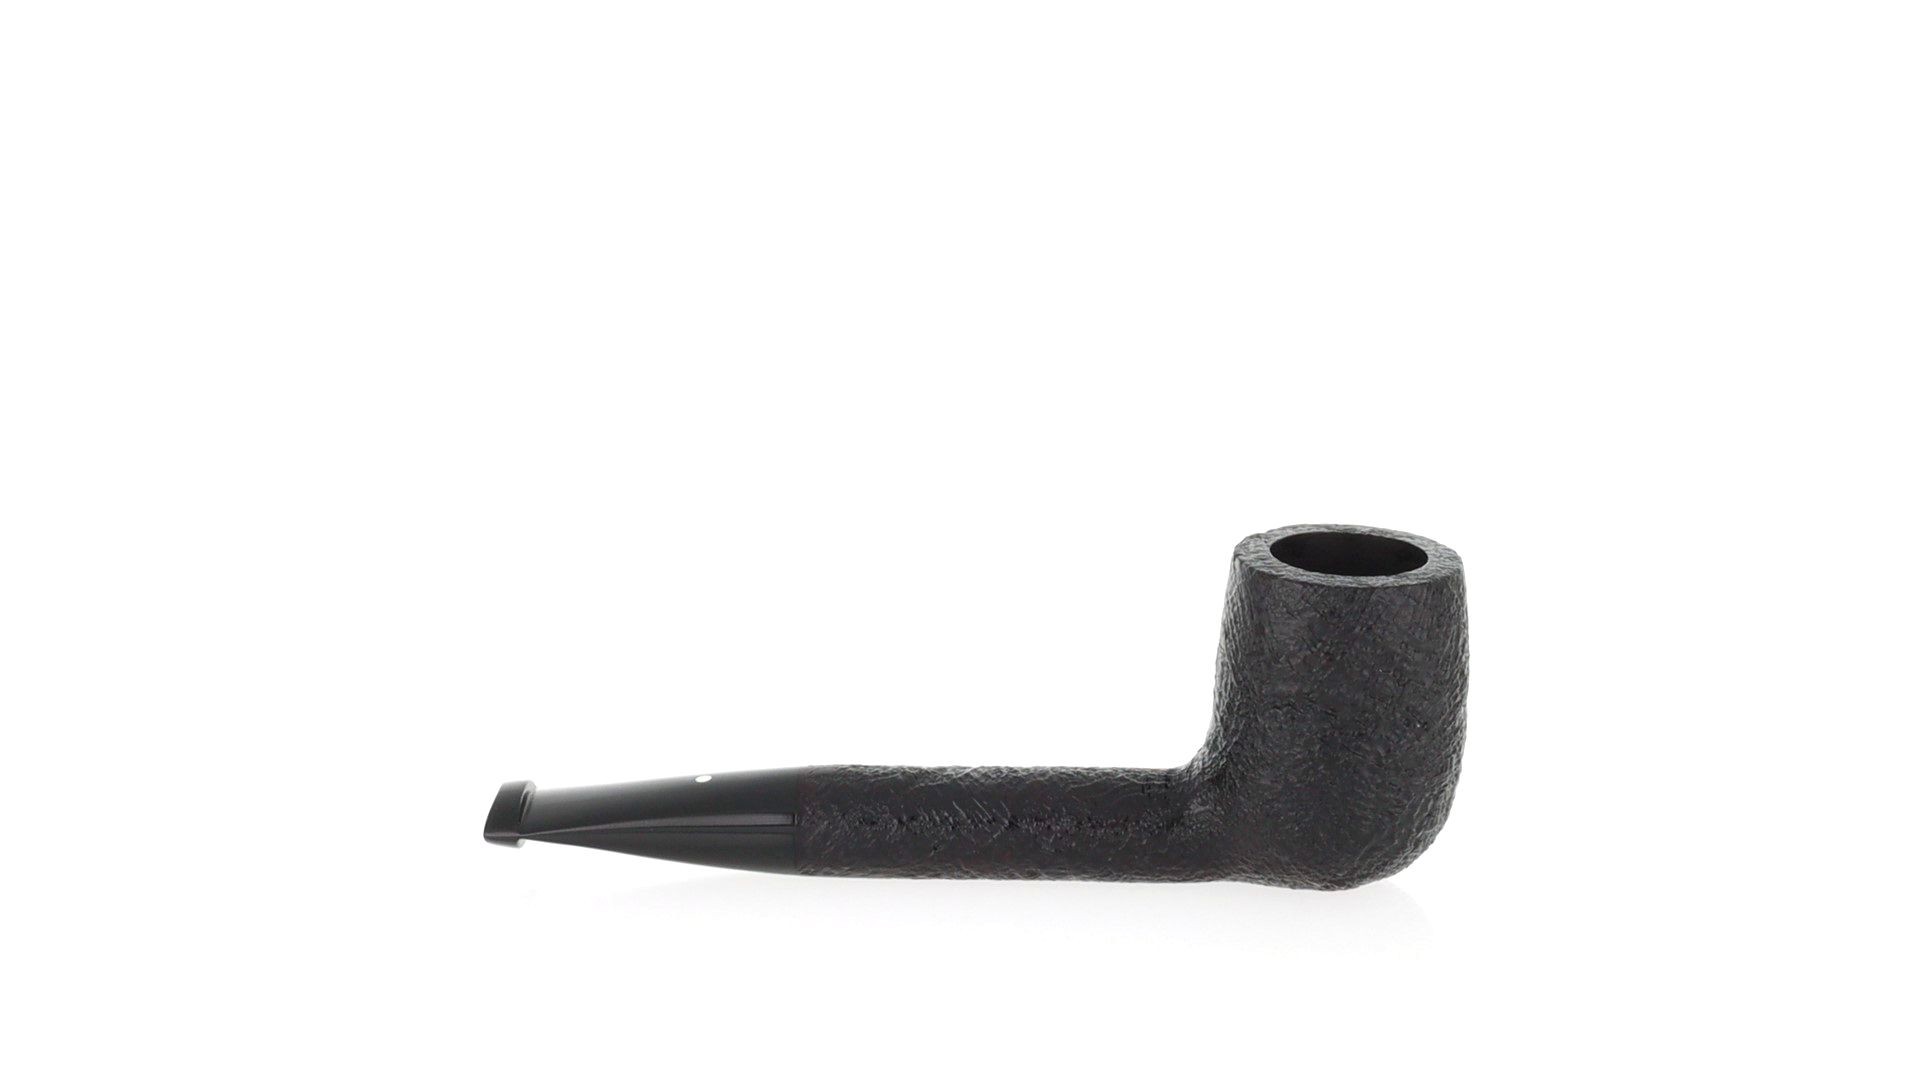 Pipa Dunhill Shell briar group 3 shape Liverpool